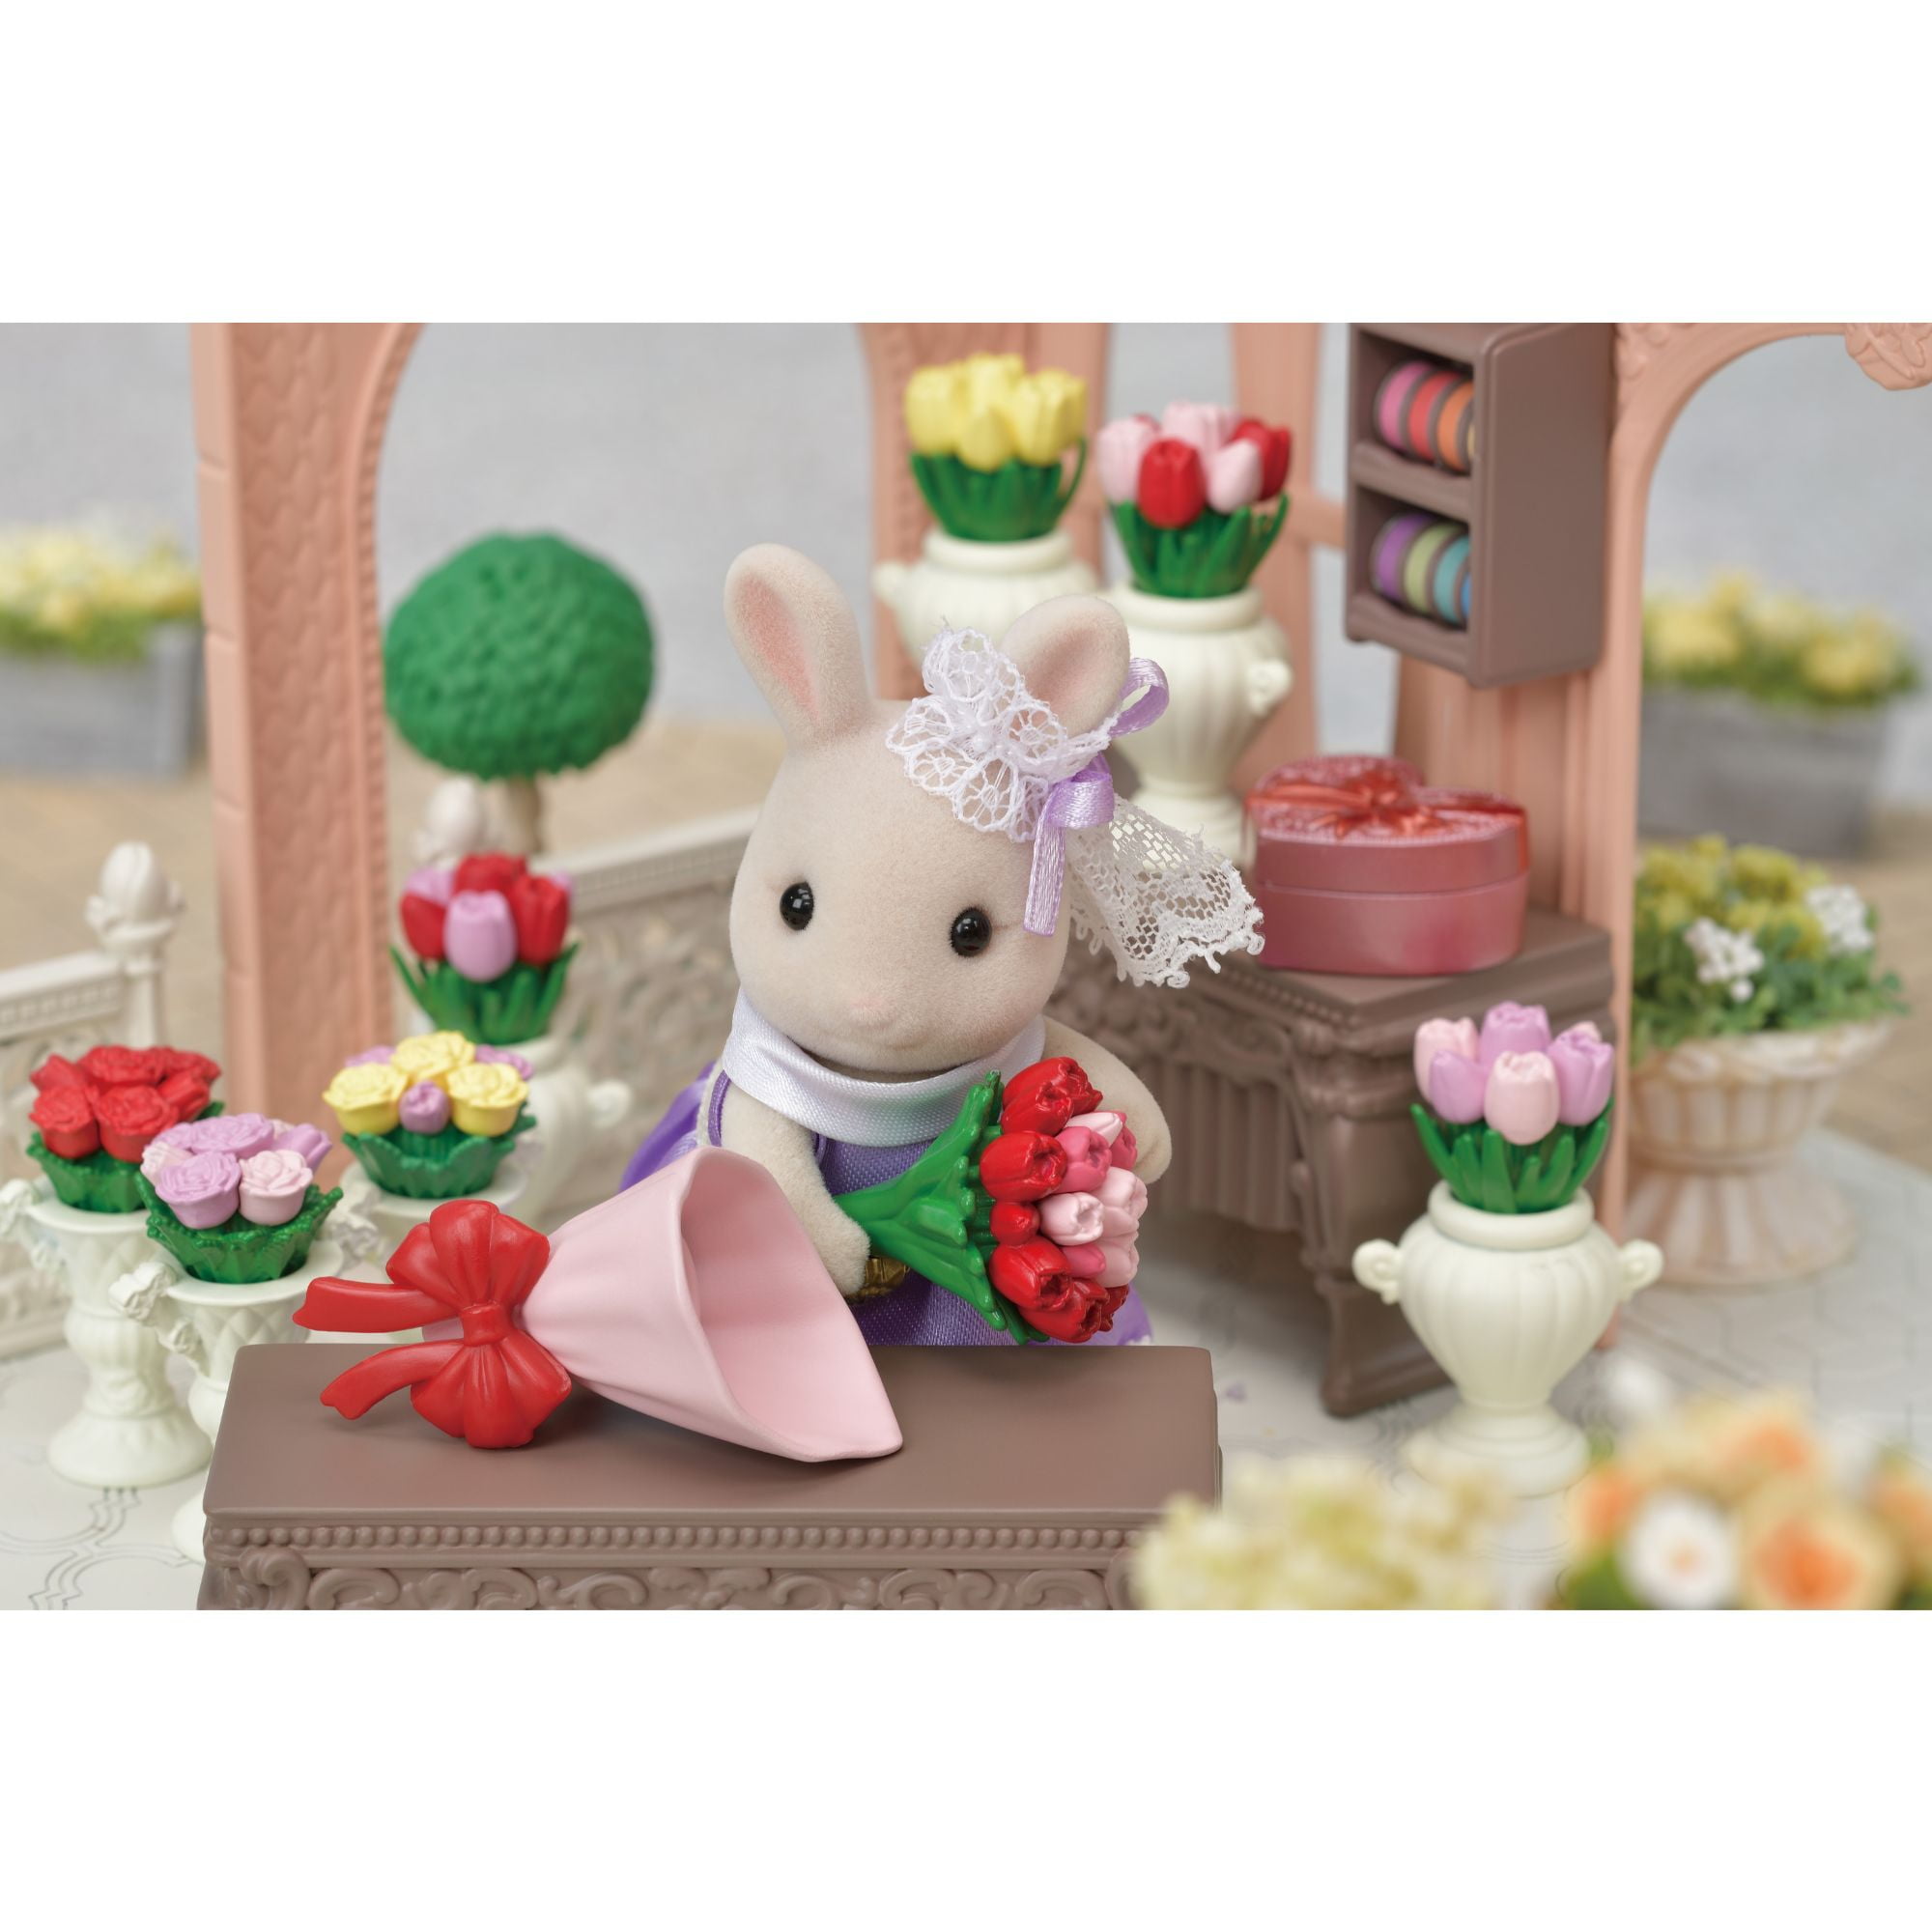 Calico Critters Flower Gifts Playset NEW IN STOCK 